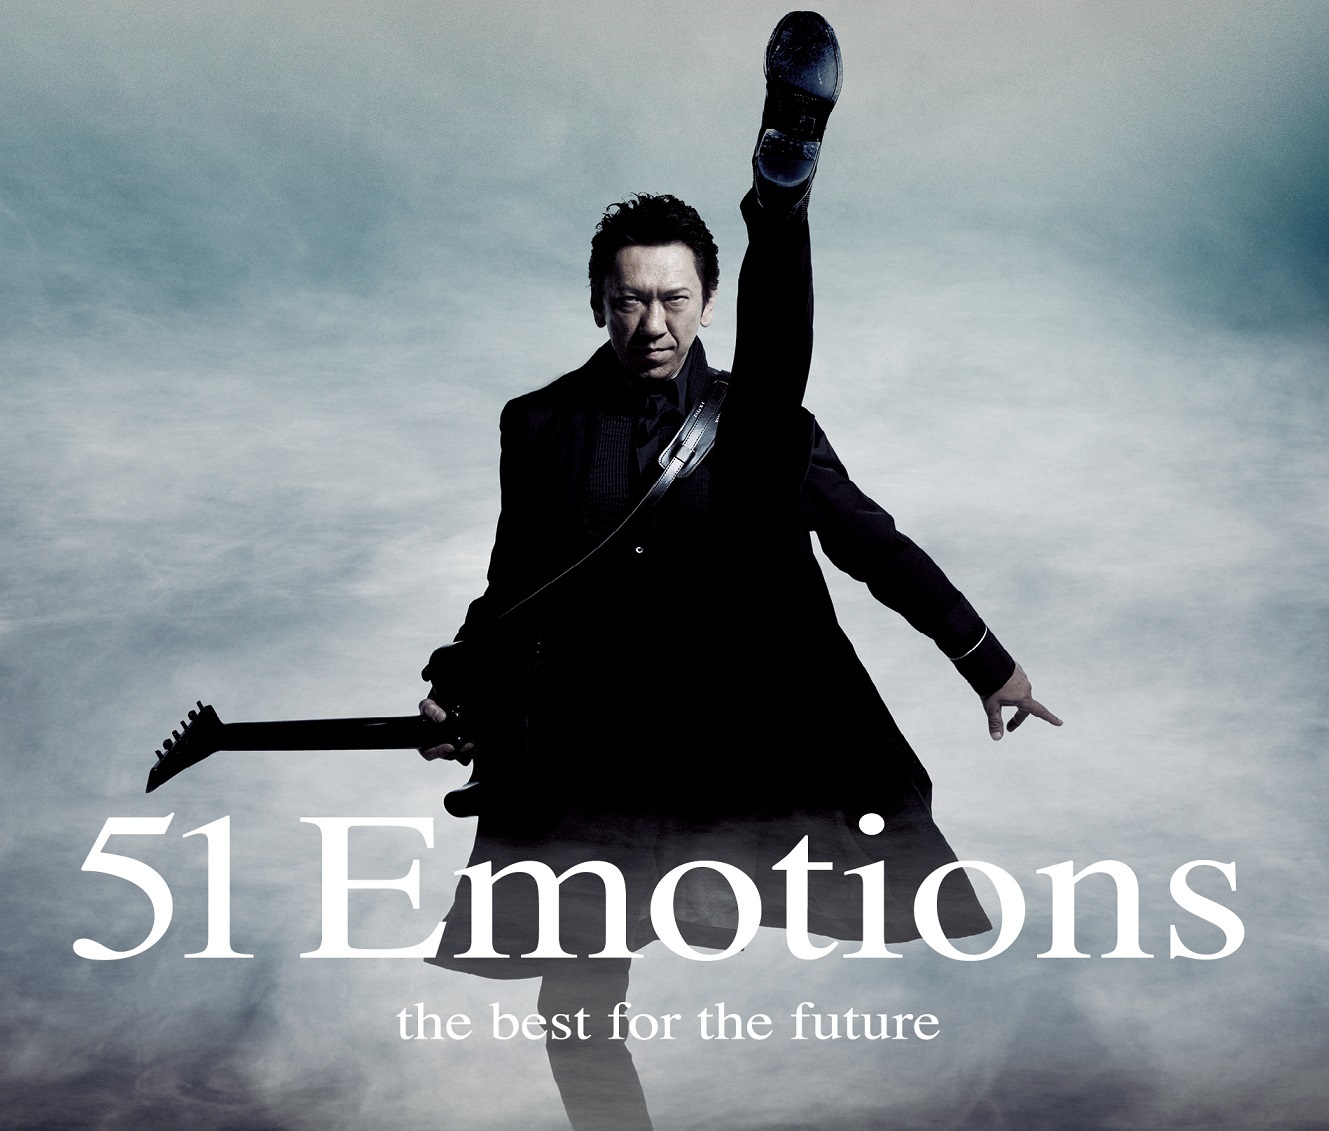 『51 Emotions -the best for the future-』